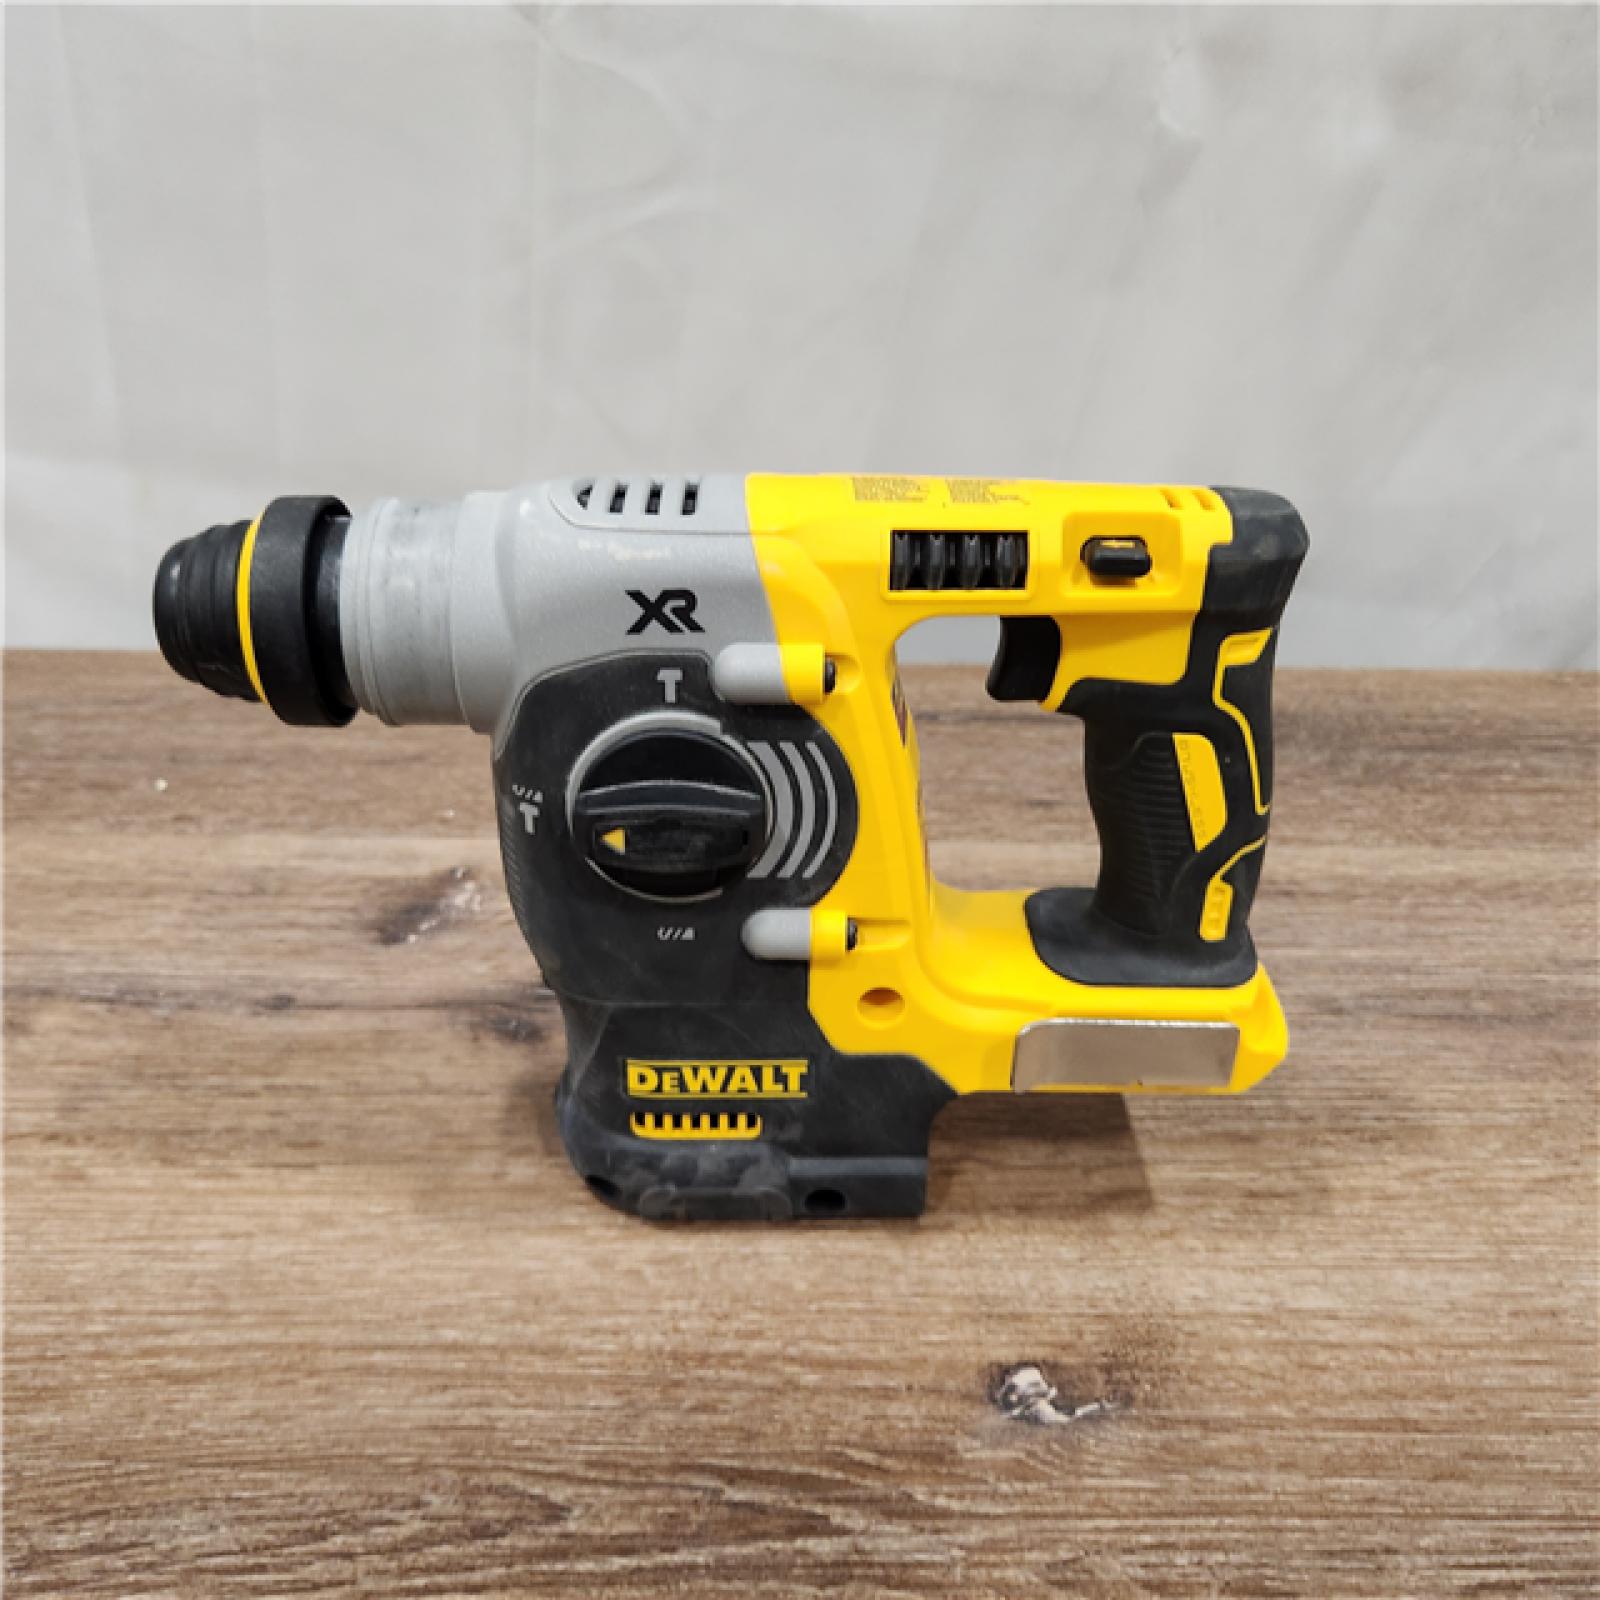 AS-IS DEWALT DCH273B 20V MAX XR Lithium-Ion Brushless Cordless 1â€ SDS-Plus L-Shape Rotary Hammer (Tool Only)